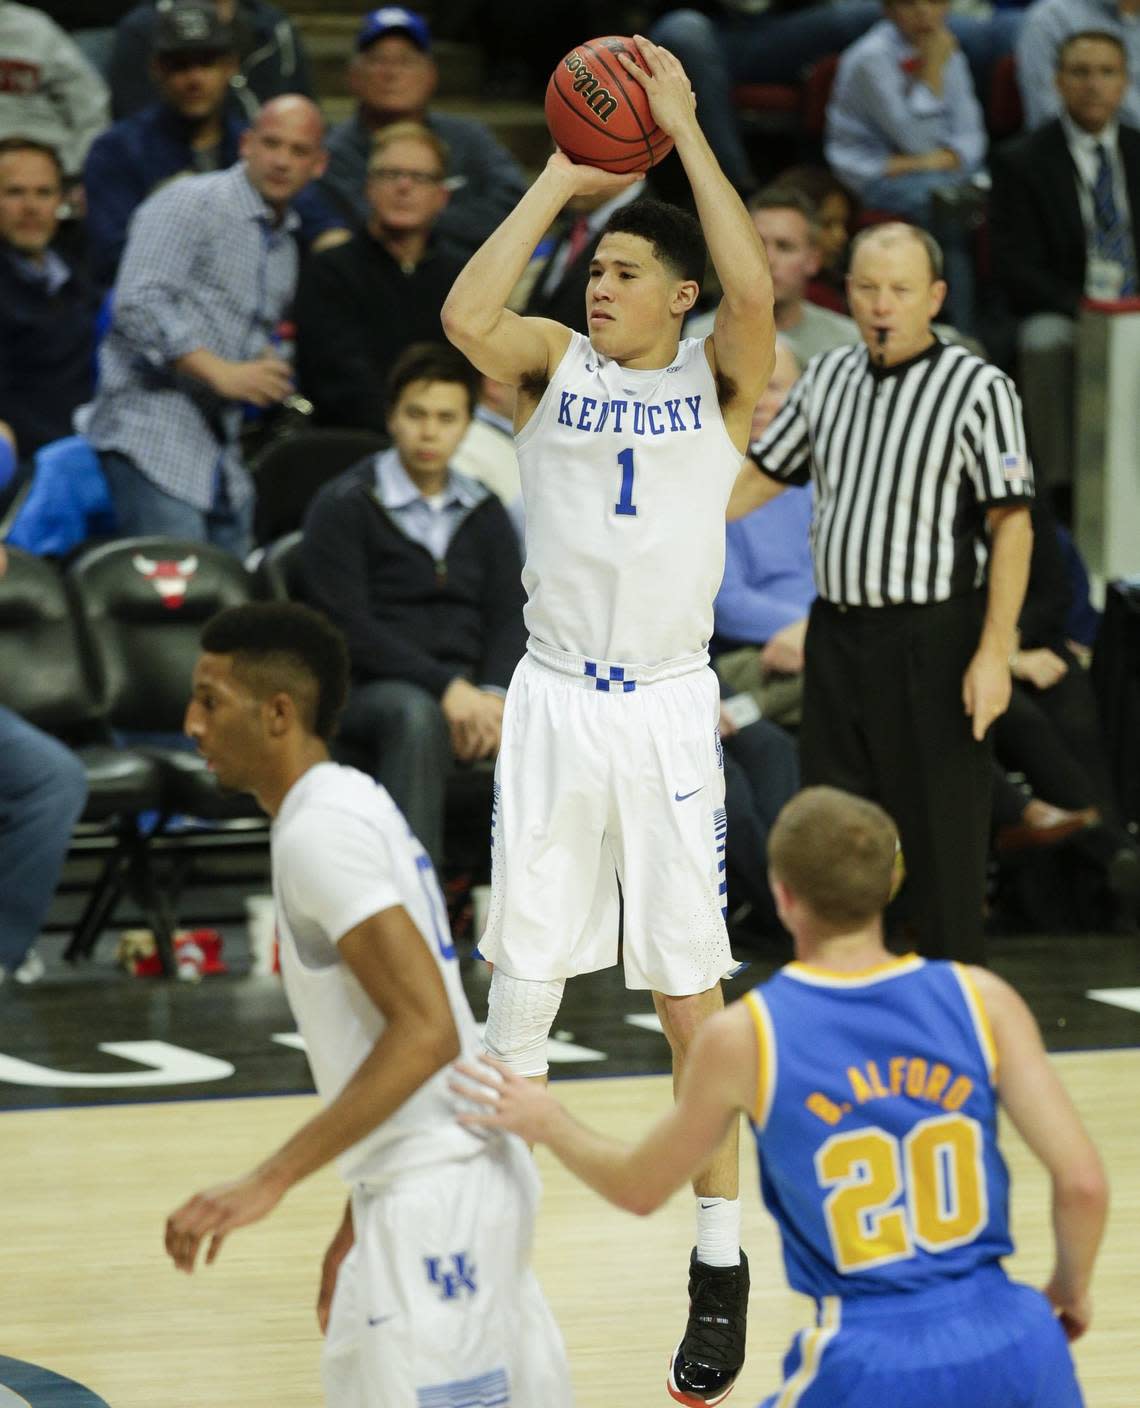 Devin Booker (1) led Kentucky with 19 points in its 83-44 victory over UCLA in 2014.